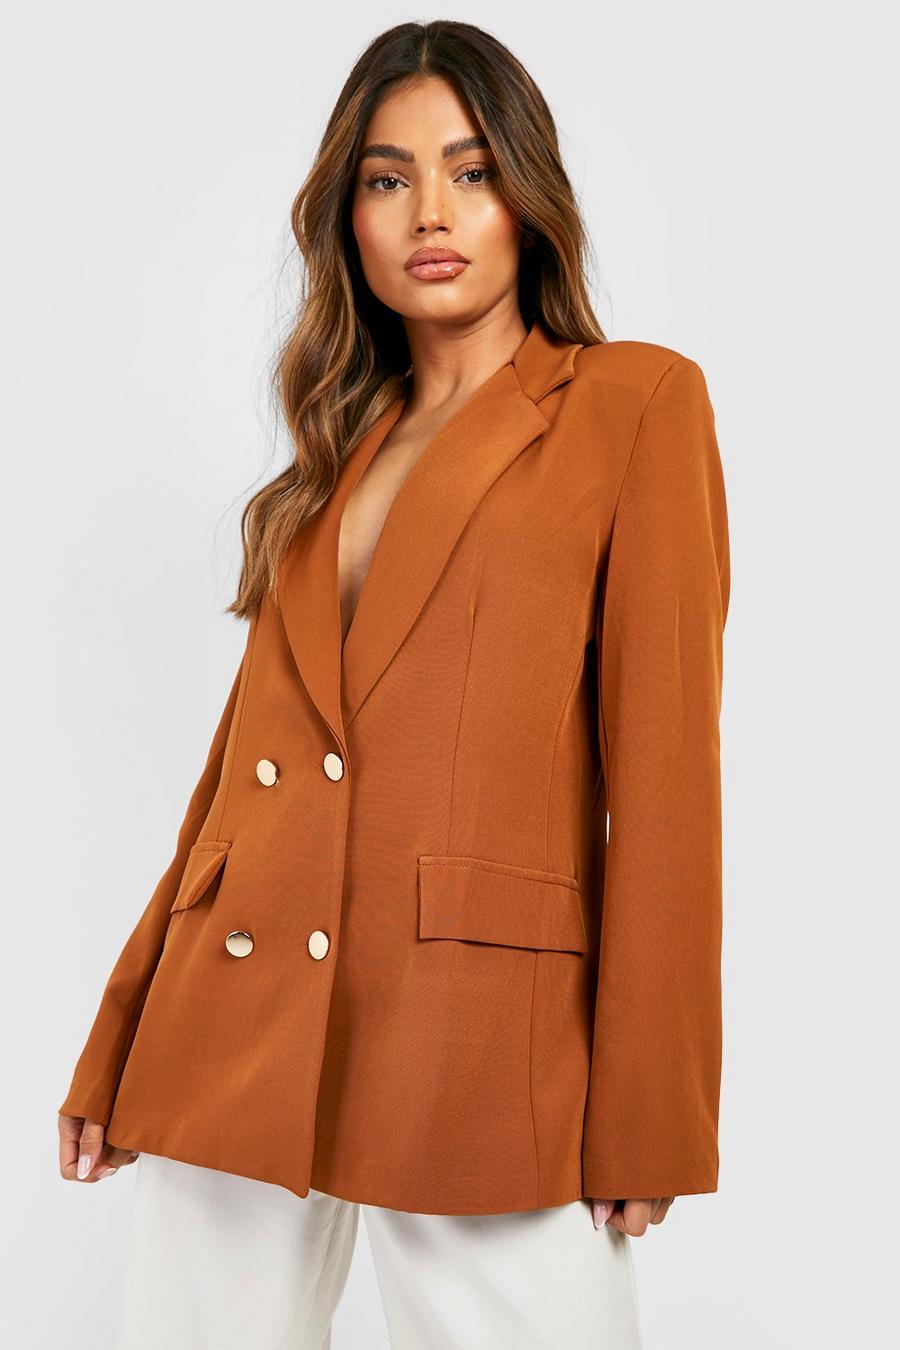 Caramel beis Double Breasted Button Front Blazer